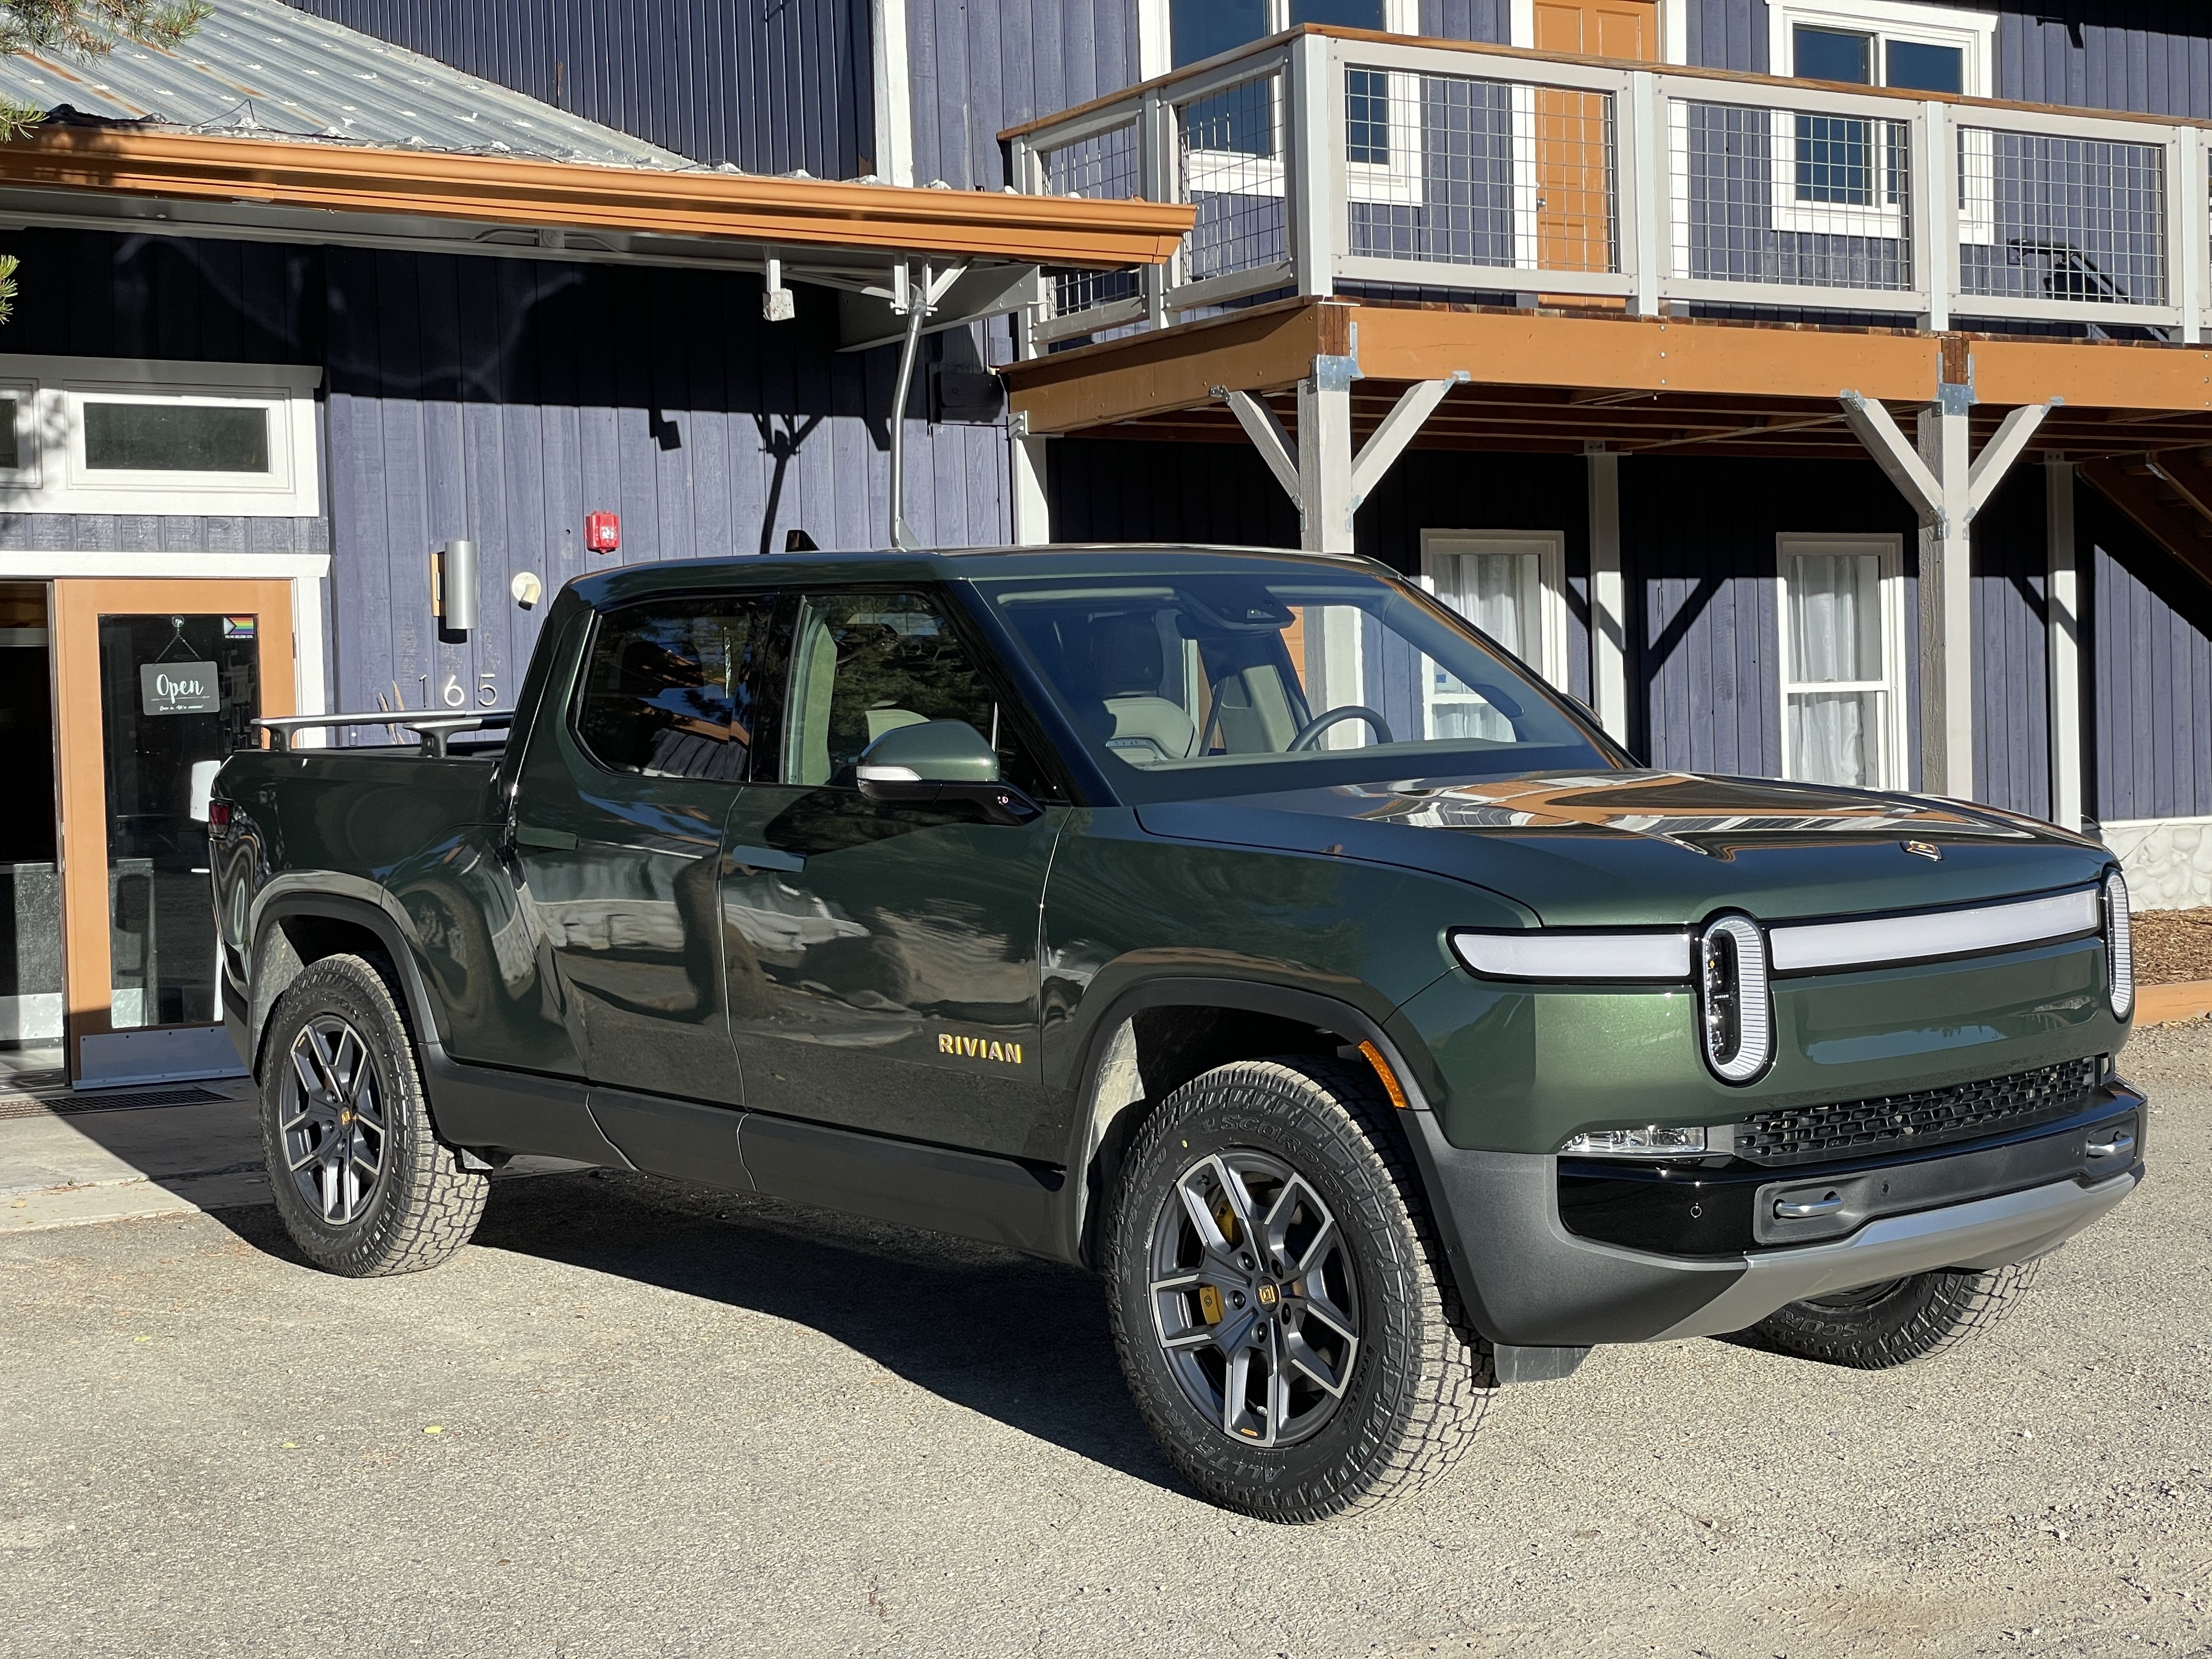 How Rivian can Regain Trust with Customers and Improve Delivery Expectations